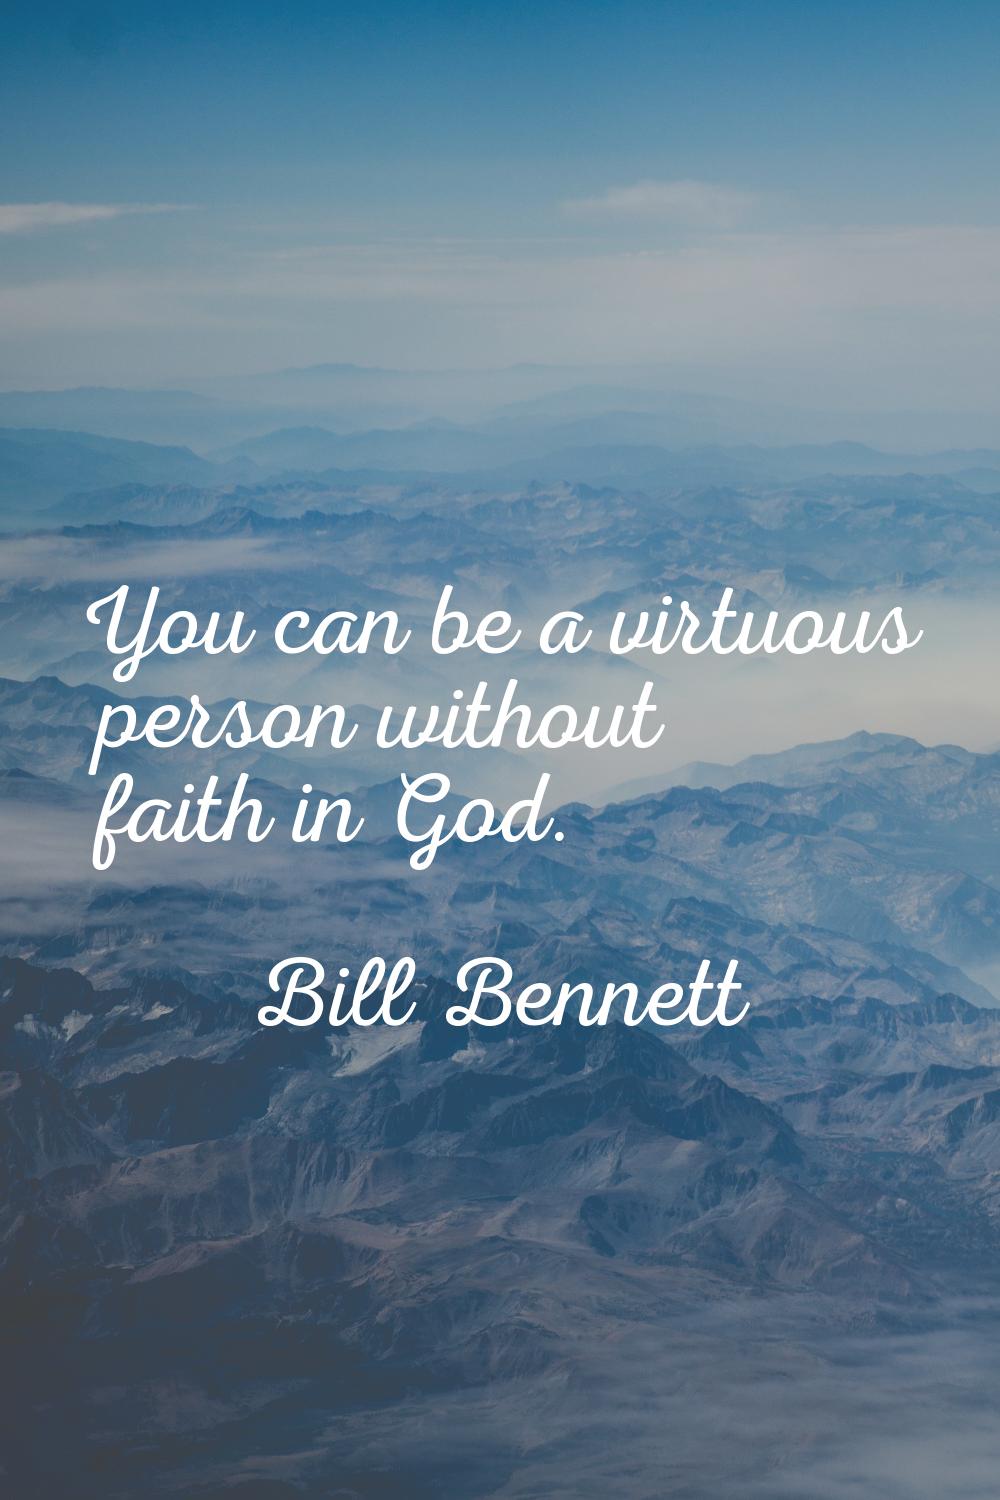 You can be a virtuous person without faith in God.